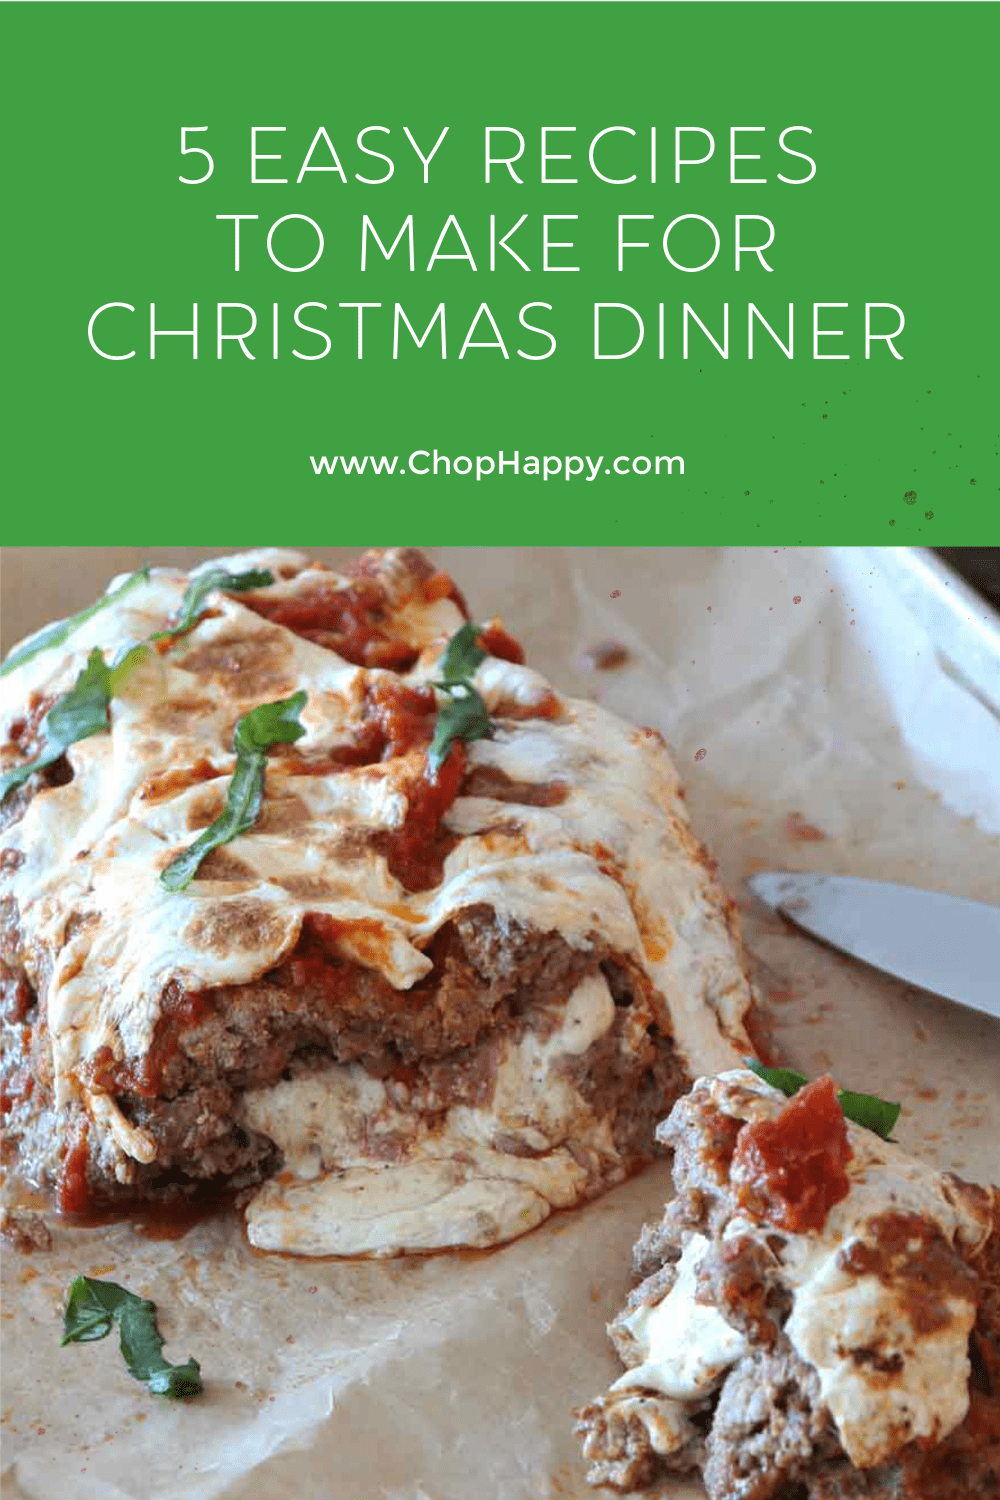 5 Easy Recipes To Make For Christmas Dinner. Here are easy recipes that will make the holiday season bright and yummy. All the recipes are easy and mostly make ahead. Happy Holidays! www.ChopHappy.com #christmasrecipes #Holidayrecipes